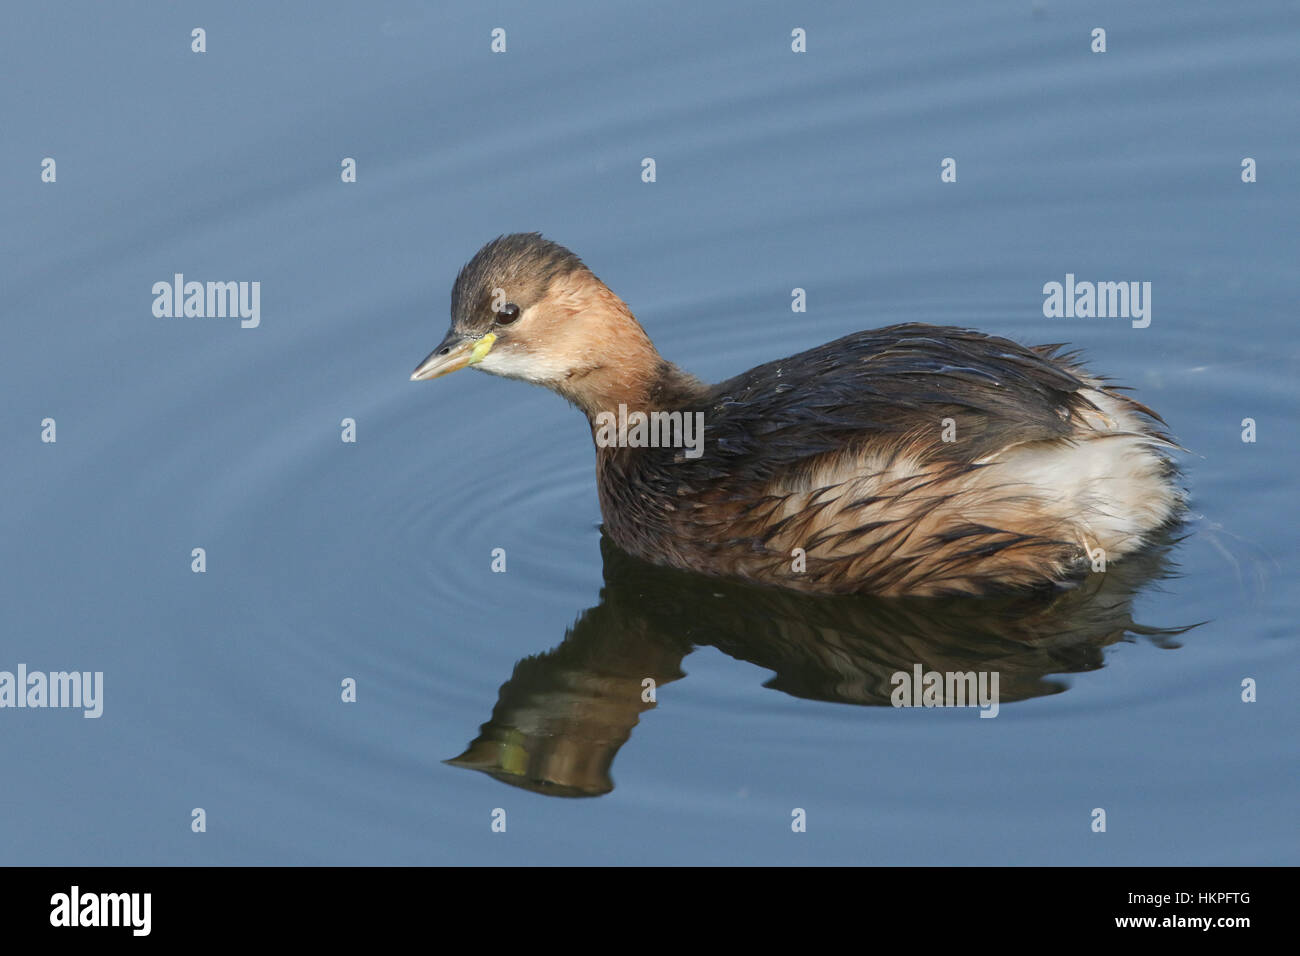 A cute Little Grebe (Tachybaptus ruficollis) swimming in a river with its reflection showing in the water. Stock Photo